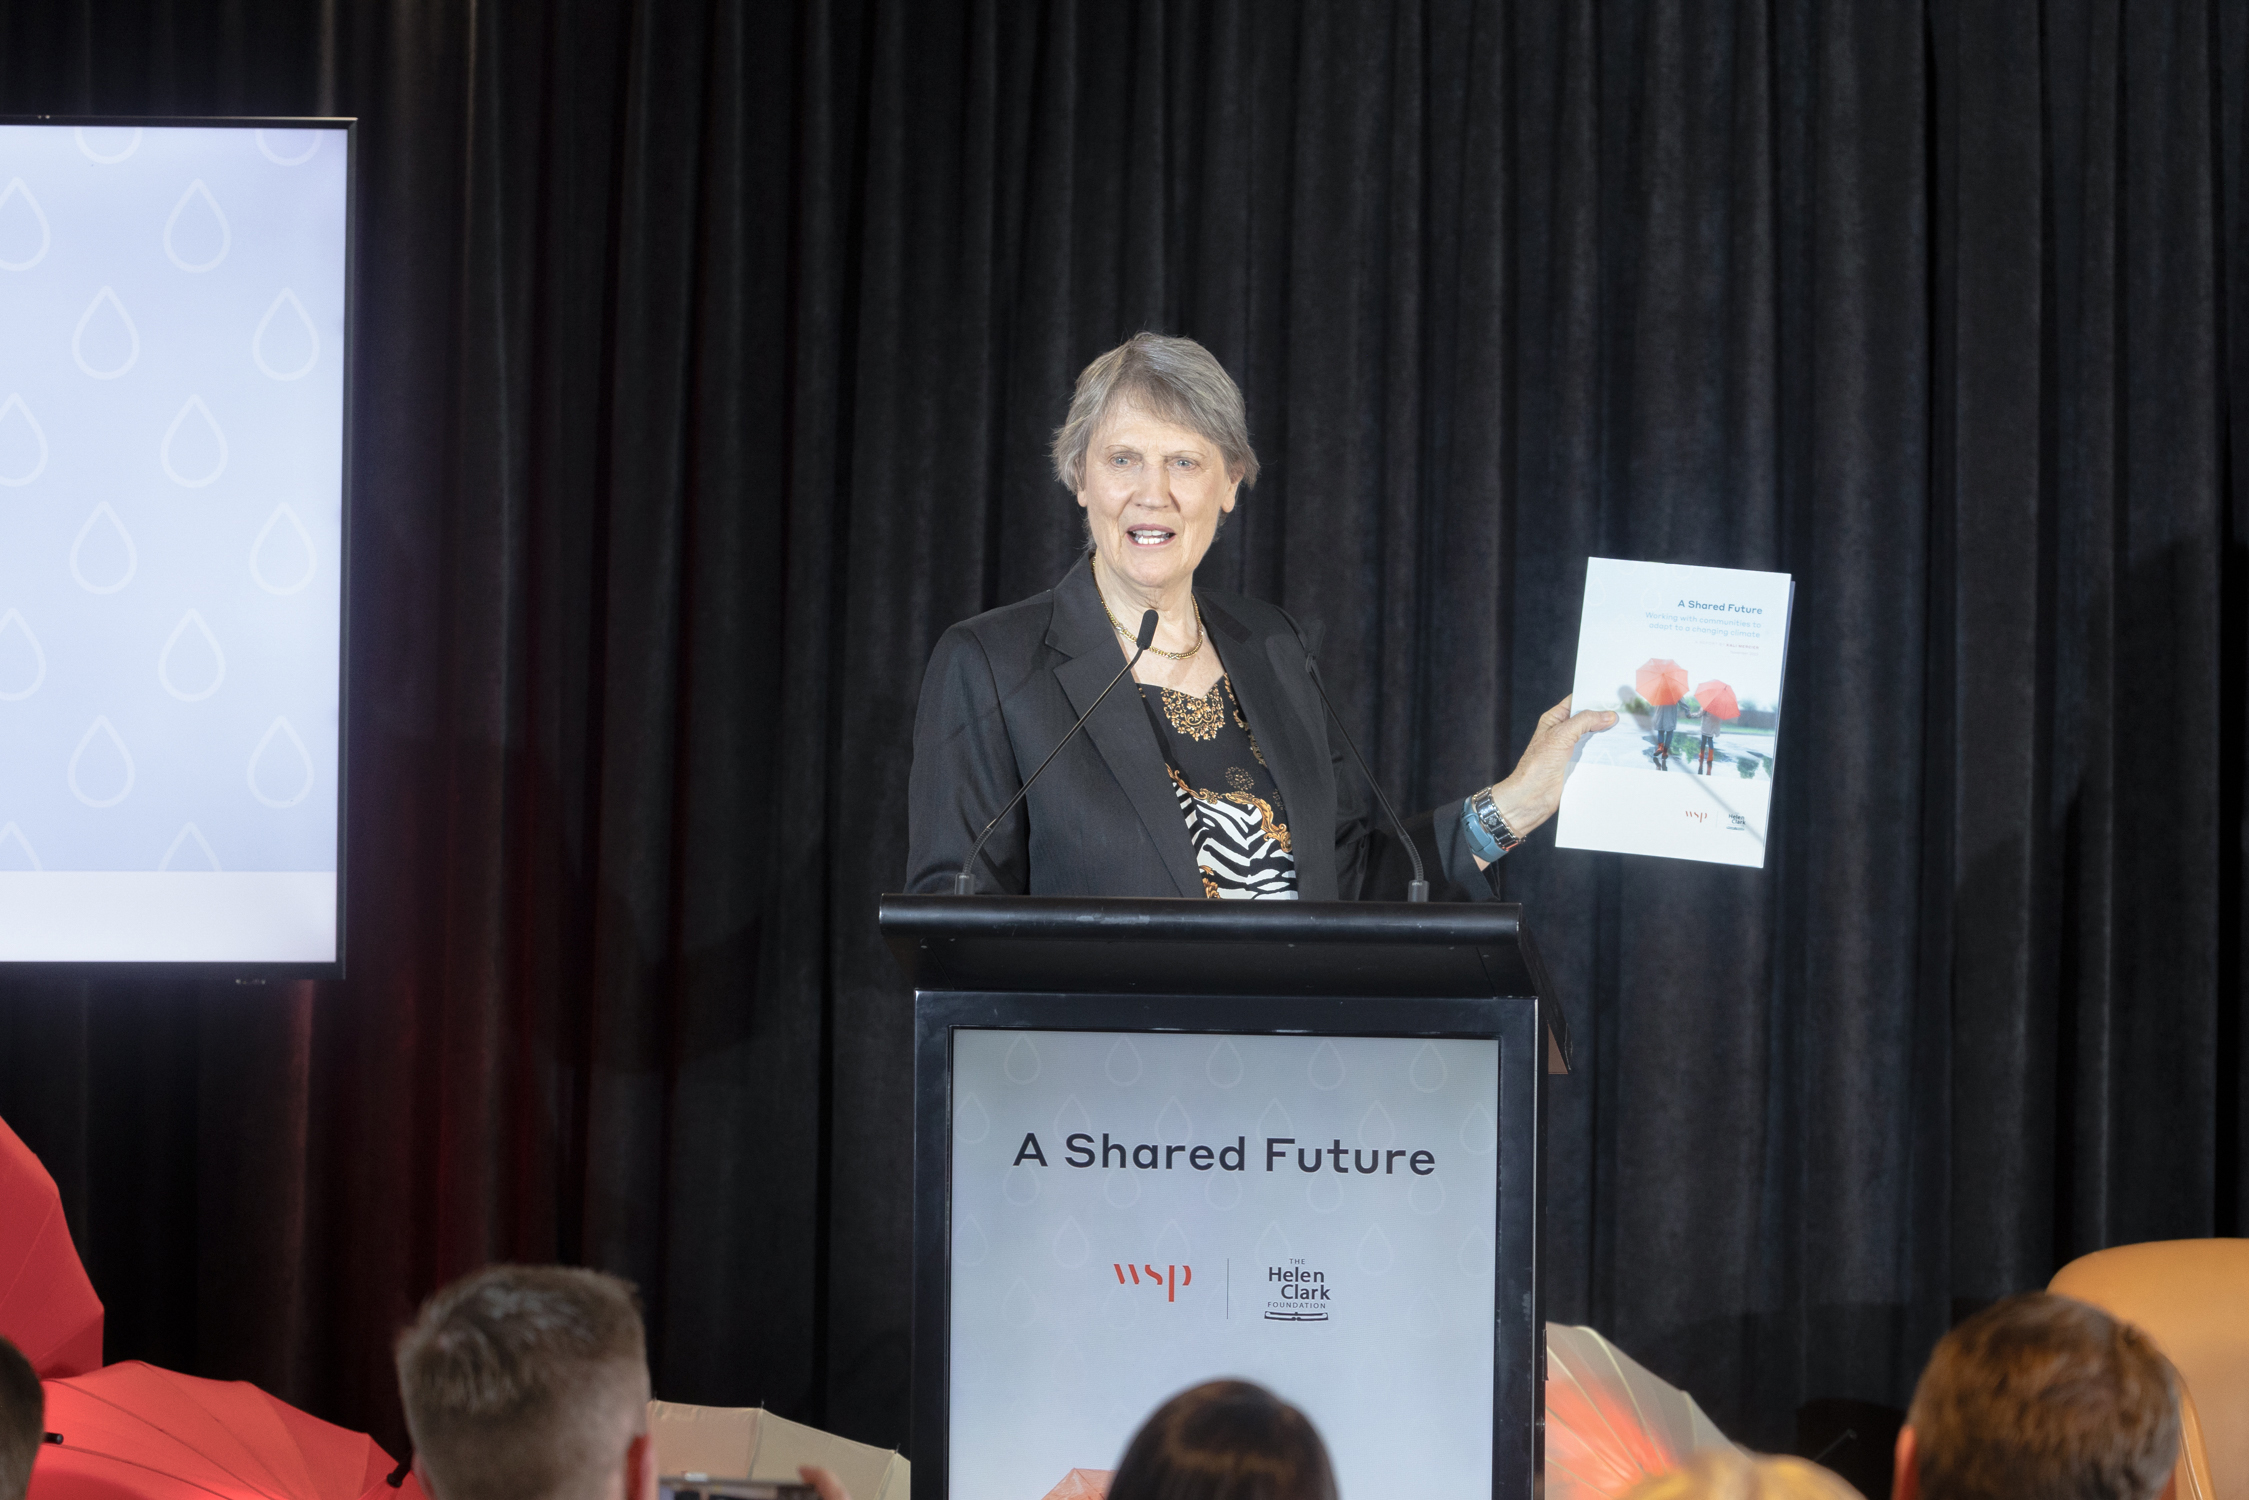 Helen Clark Foundation patron, Helen Clark, speaks at a podium holding a copy of the new report A Shared Future, which looks at involving communities in adaptation efforts and how meaningful community engagement can strengthen climate change adaptation.